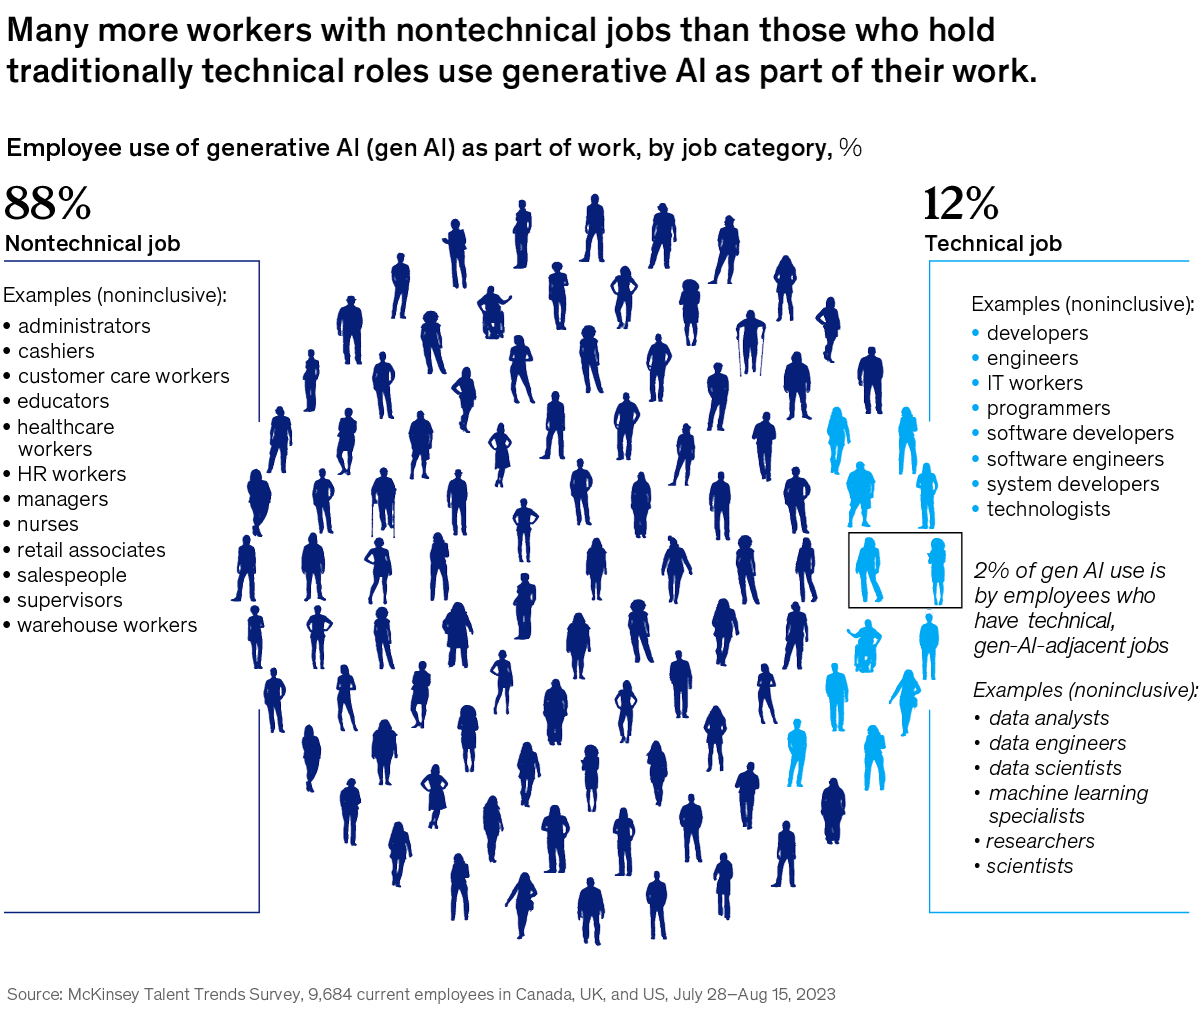 A chart titled “Many more workers with nontechnical jobs than those who hold traditionally technical roles use generative AI as part of their work.” Click to open the full article on McKinsey.com.